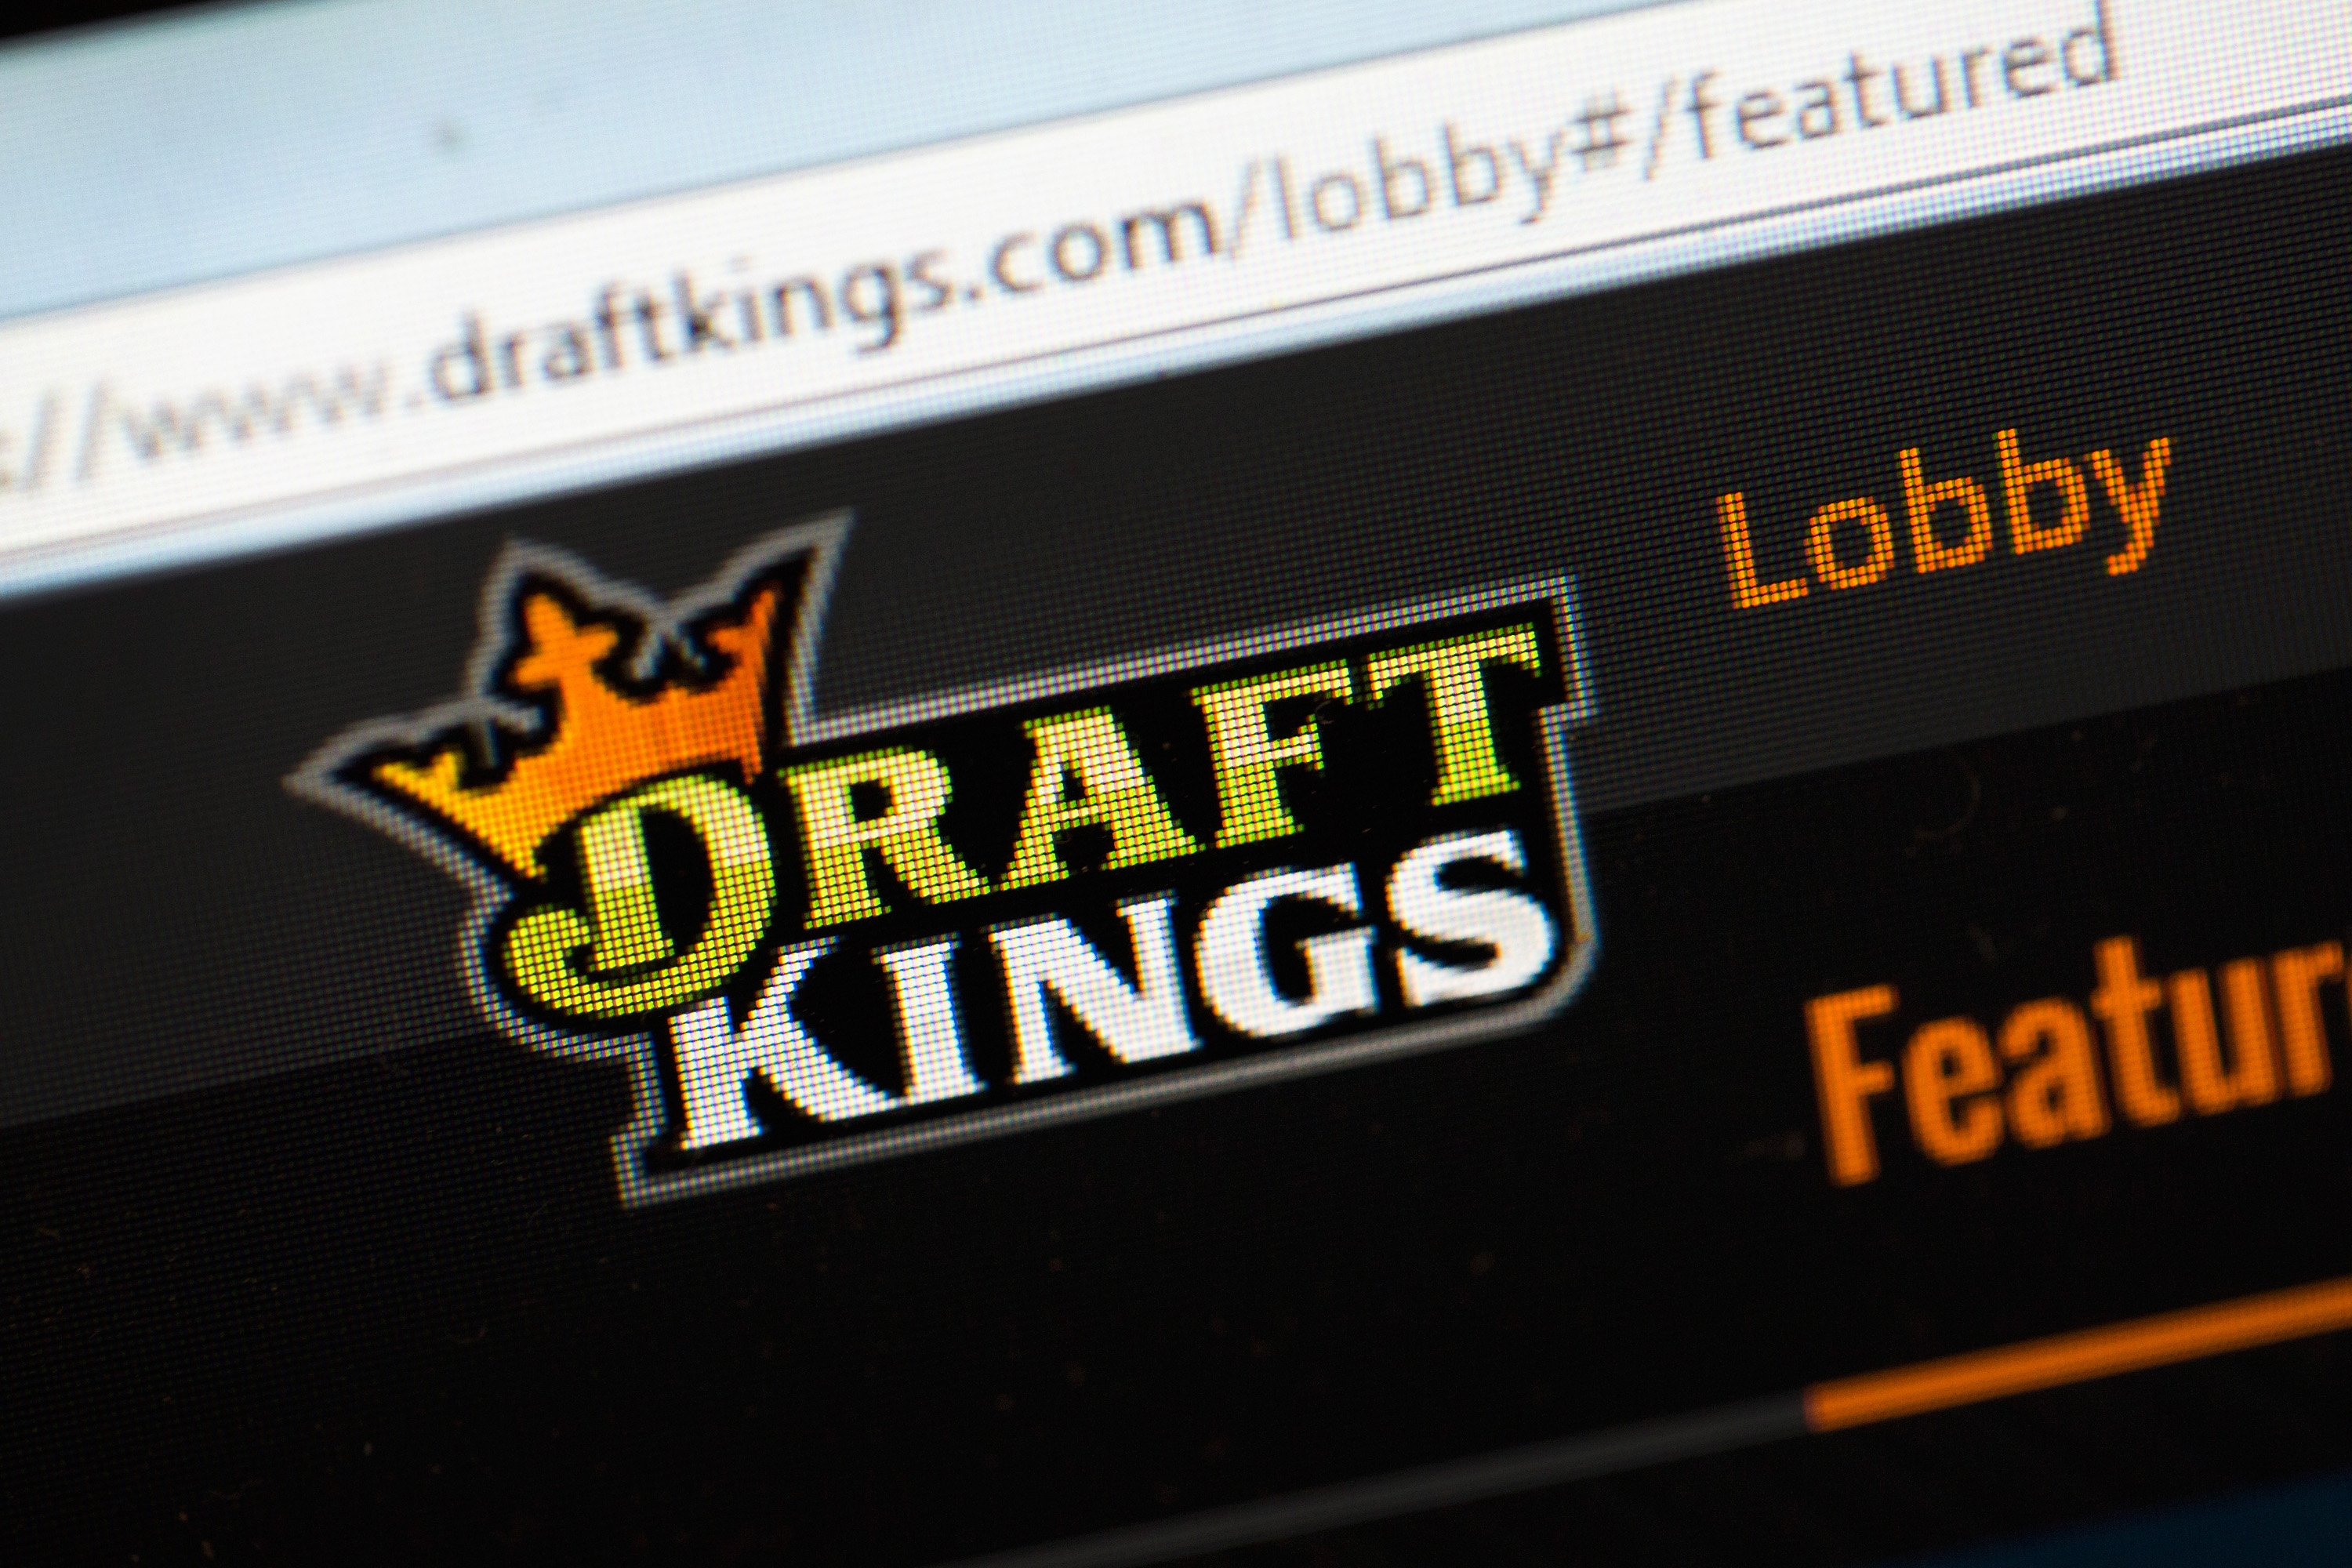 The fantasy sports website DraftKings is shown on Oct. 16, 2015 in Chicago, Ill. (Scott Olson—Getty Images)